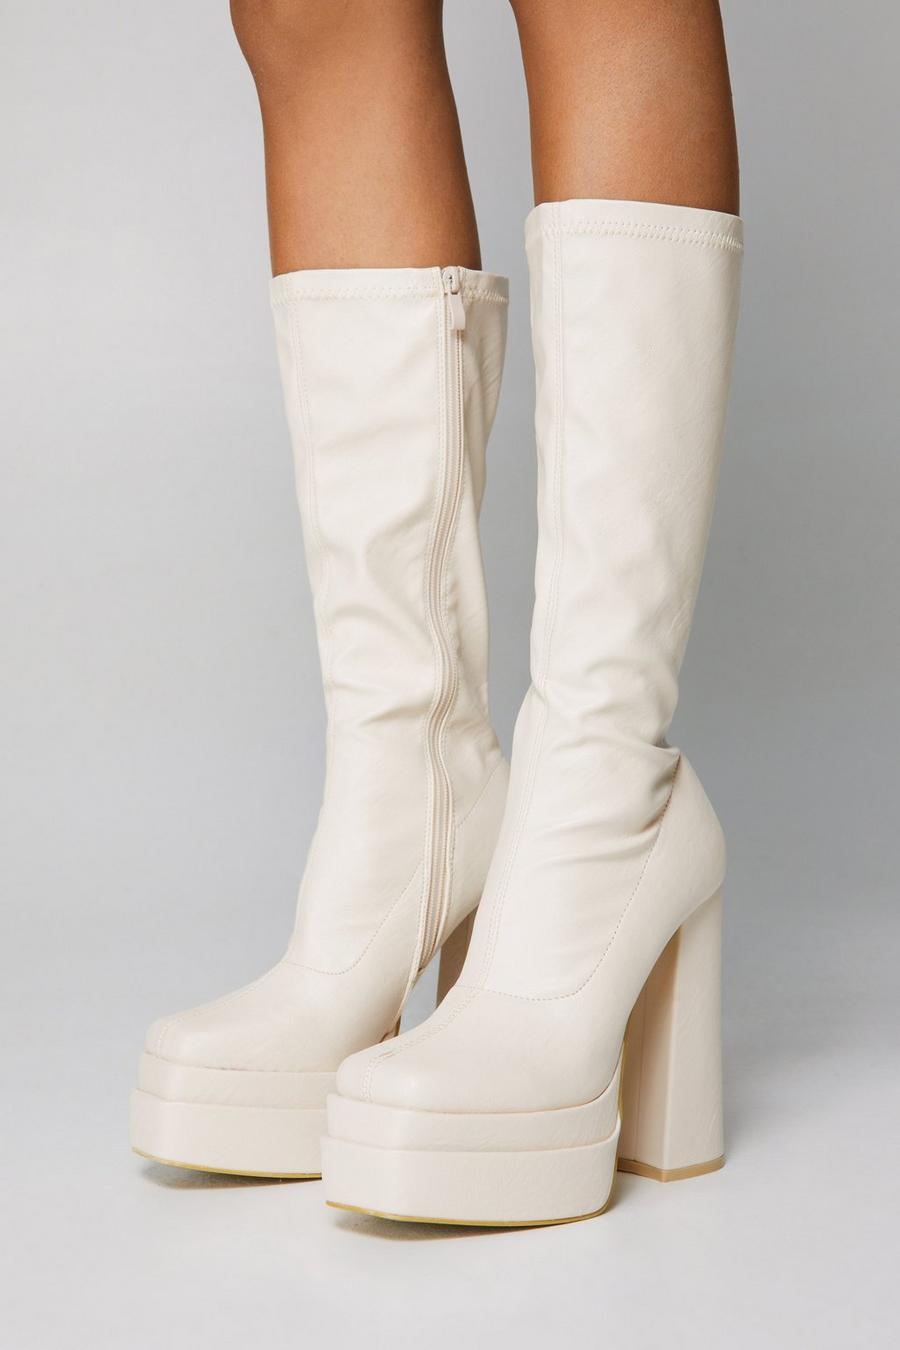 Cream Faux Leather Platform Knee High Sock Boots